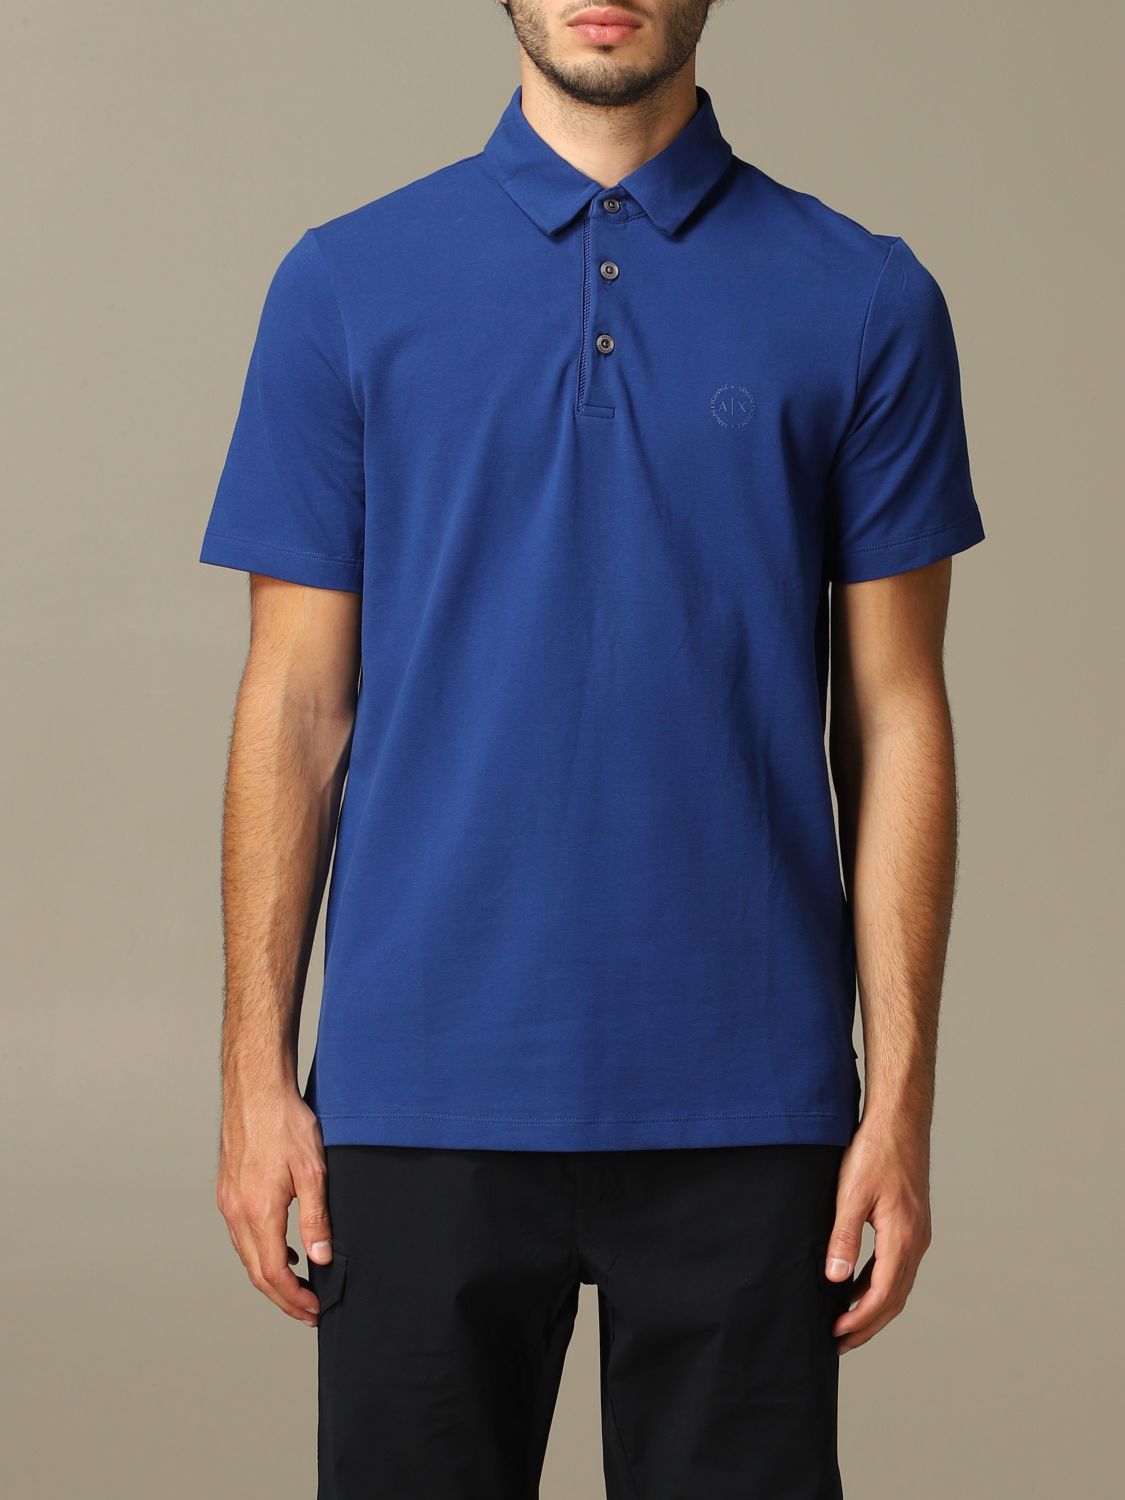 Armani Exchange Outlet: polo shirt with short sleeves - Blue | Armani ...